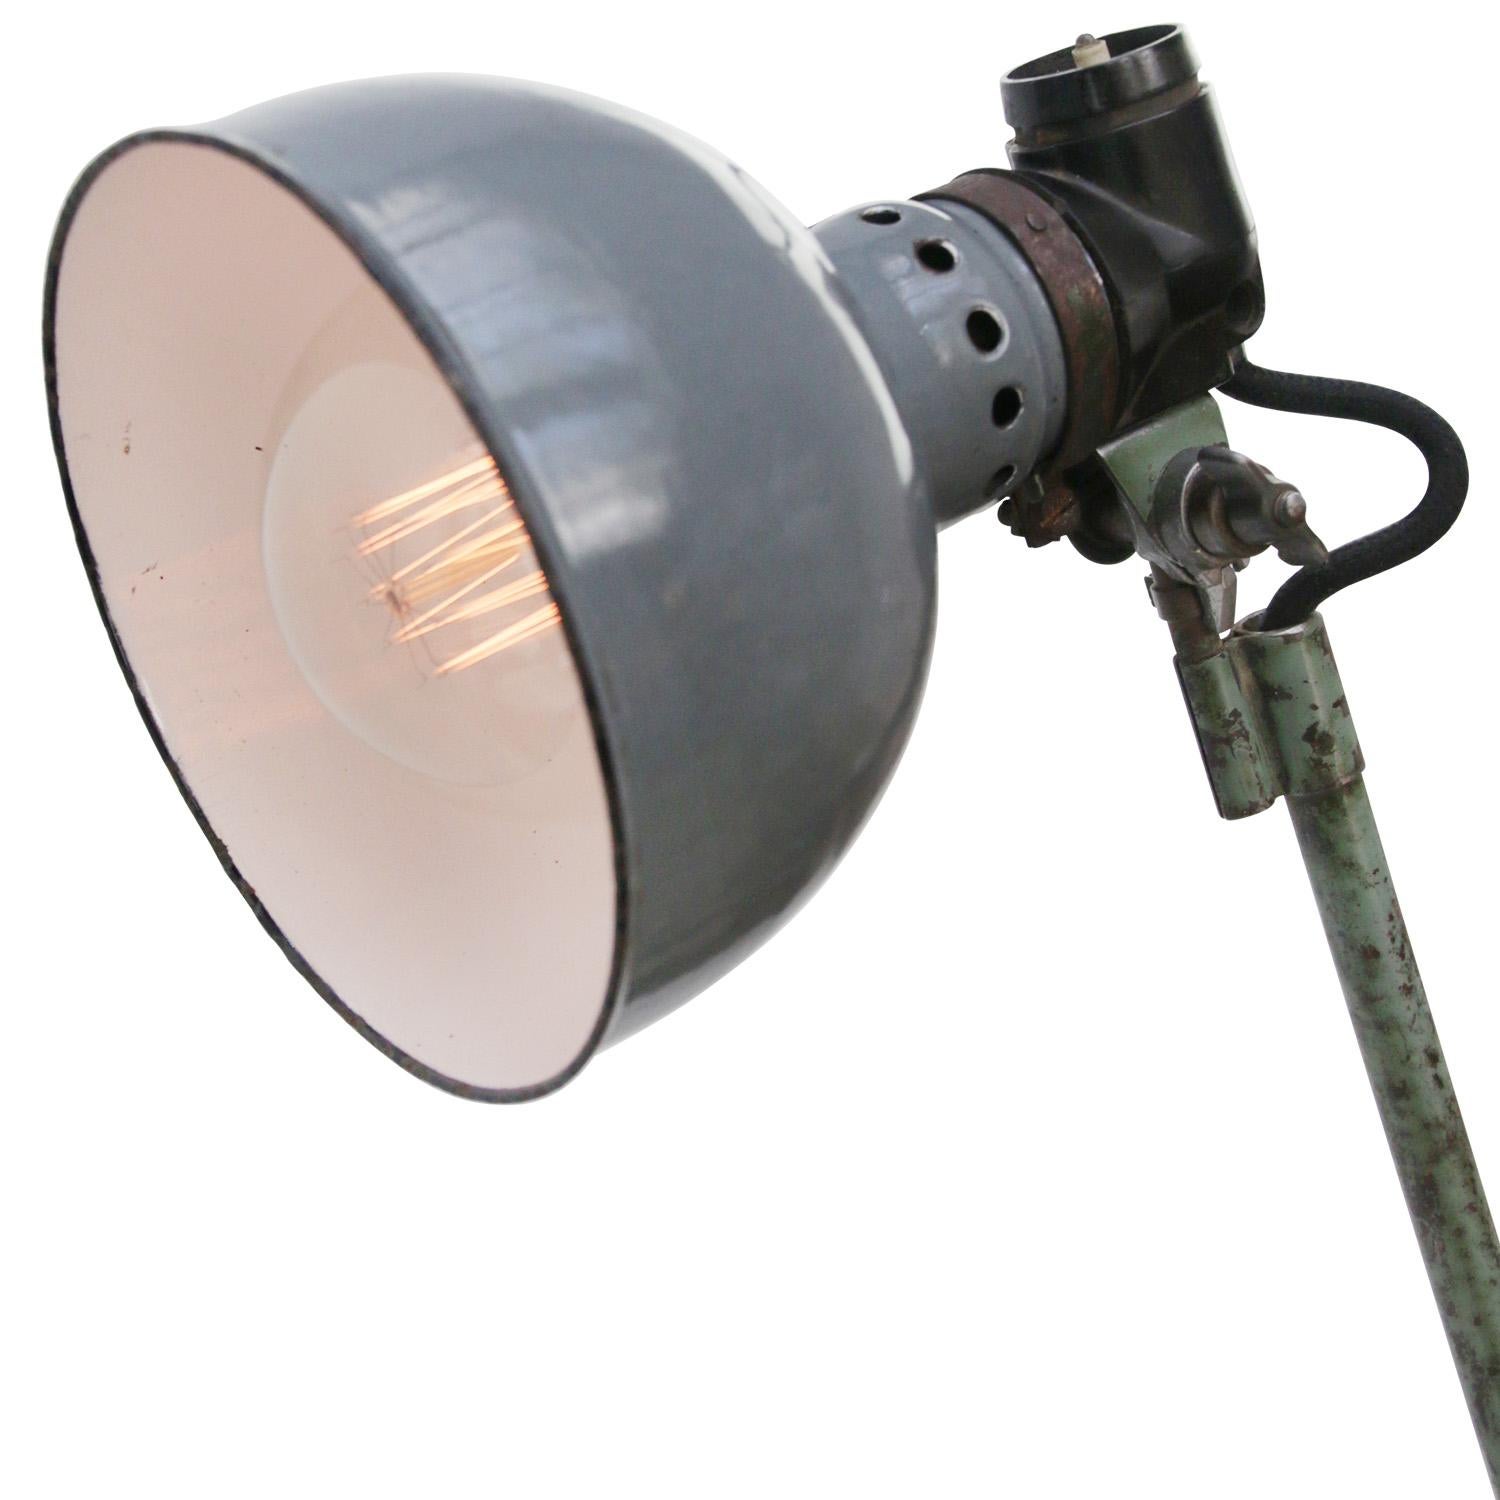 Grey blue industrial 2-arm work light by Rademacher
Adjustable in height and angle
Including plug and switch

Weight: 2.00 kg / 4.4 lb

Priced per individual item. All lamps have been made suitable by international standards for incandescent